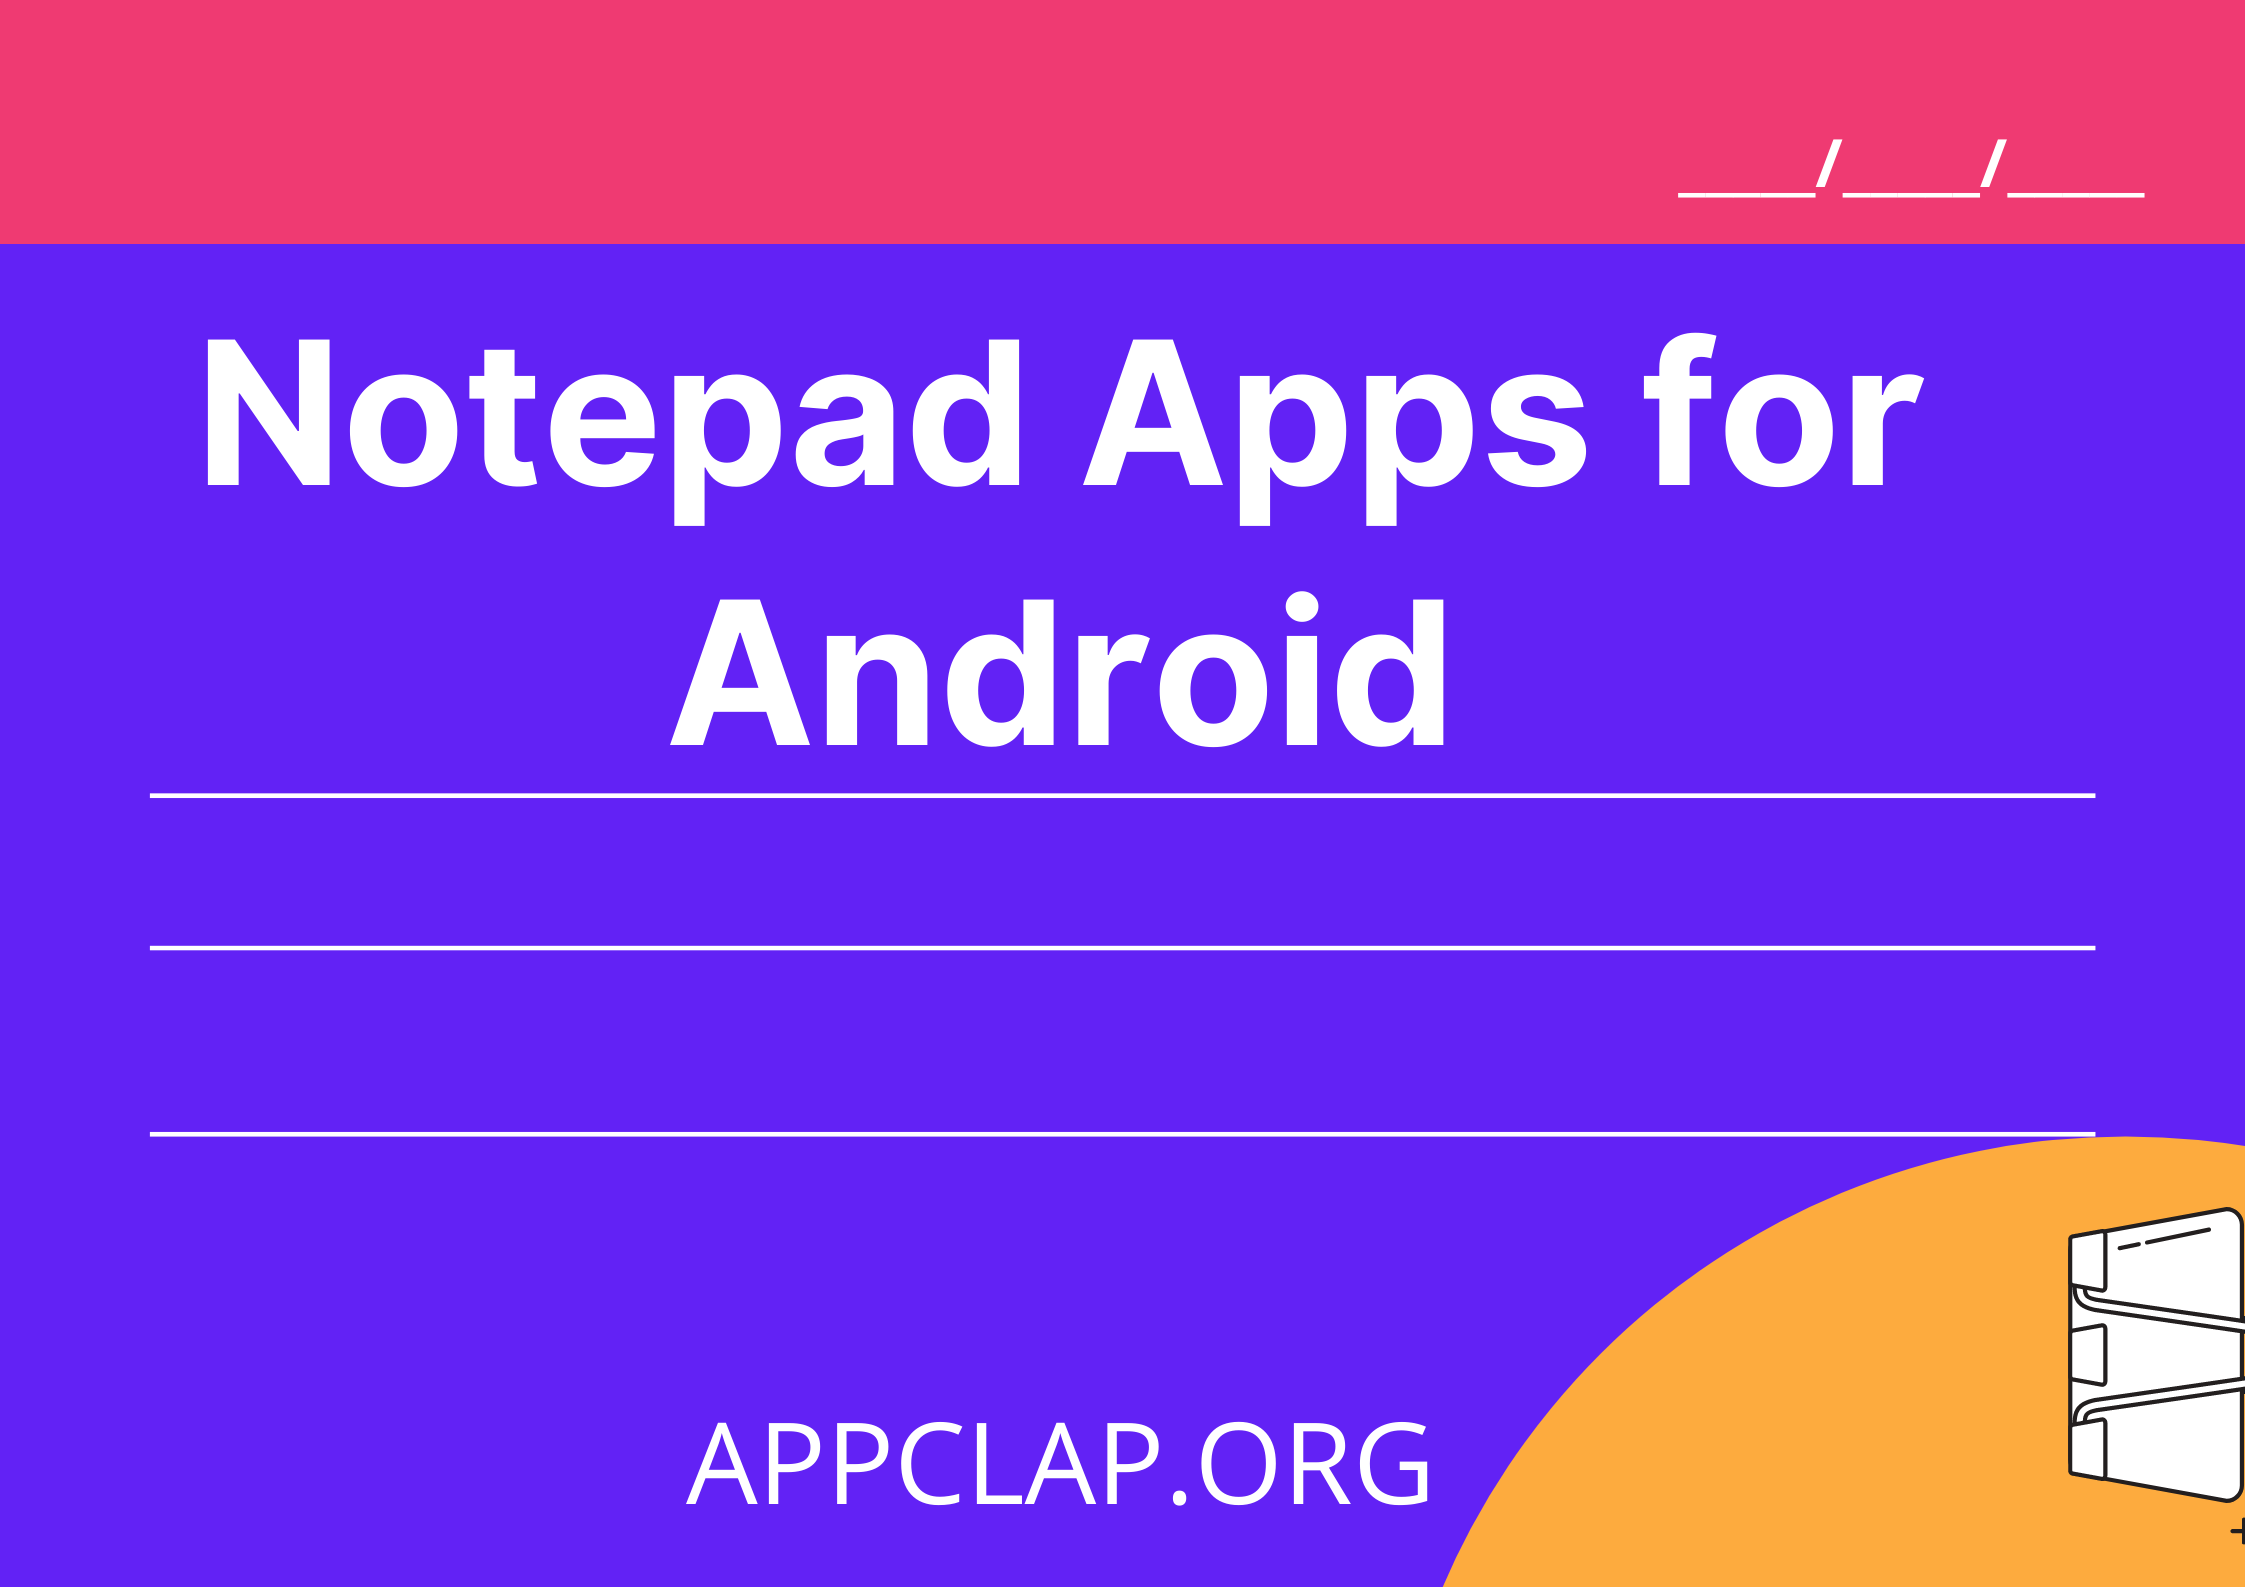 Notepad Apps for Android